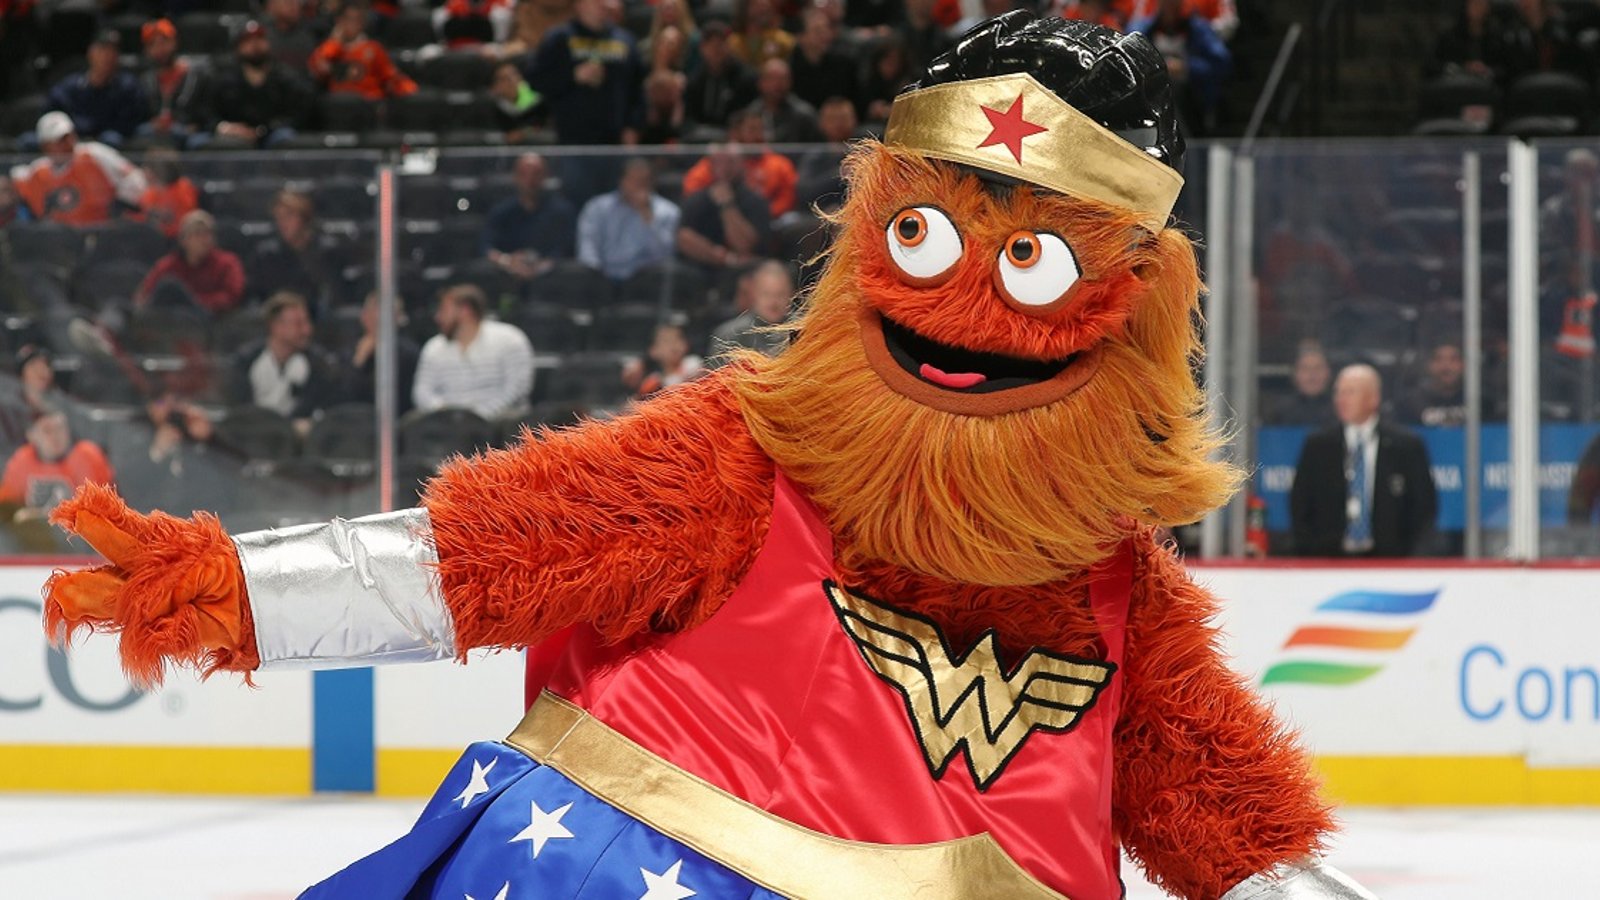 The NHL's most memorable Halloween costumes of the past.